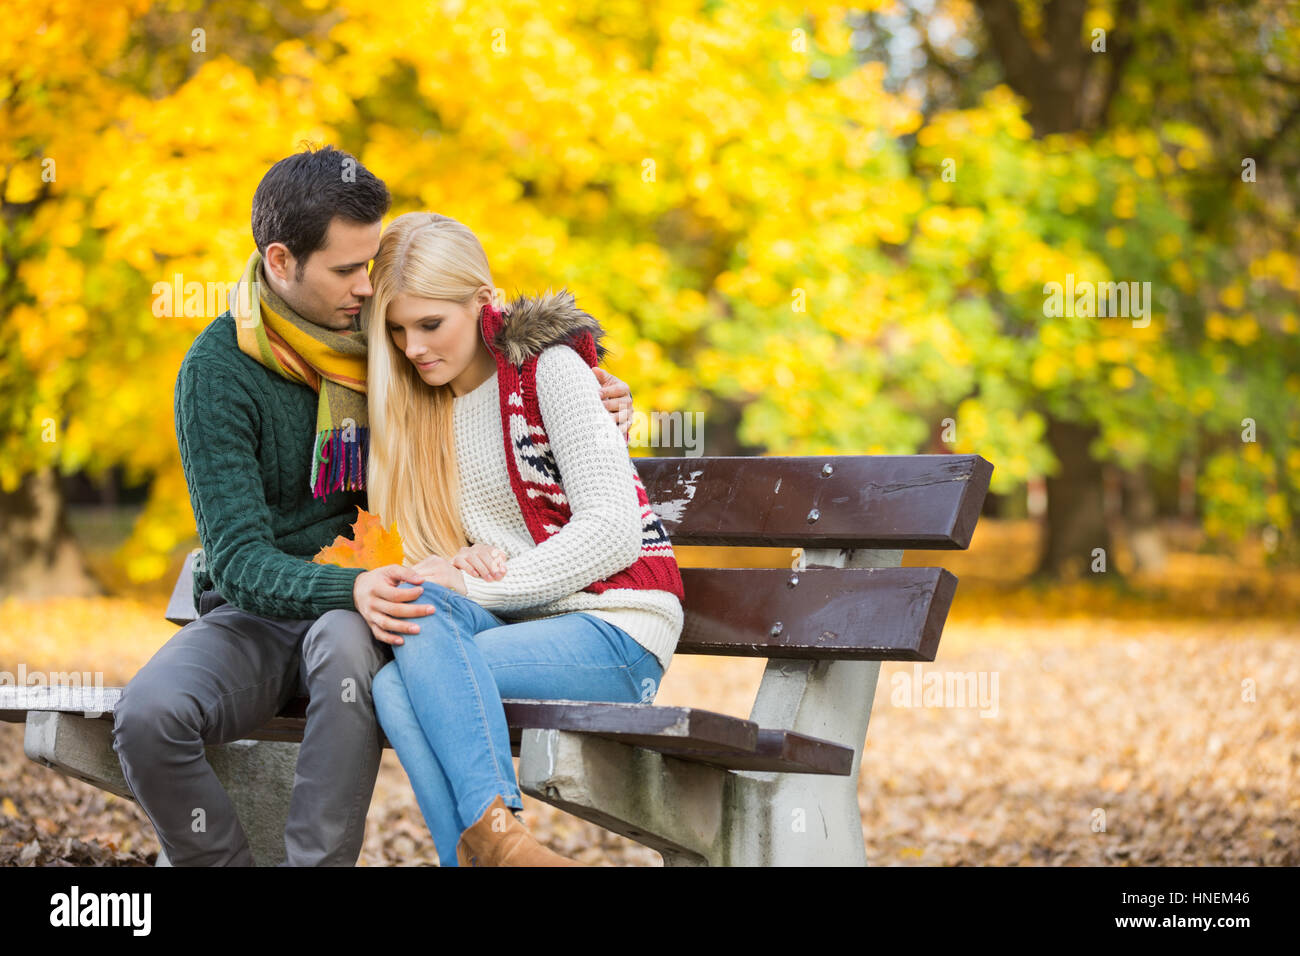 Passionate young man hugging shy woman on park bench during autumn Stock Photo